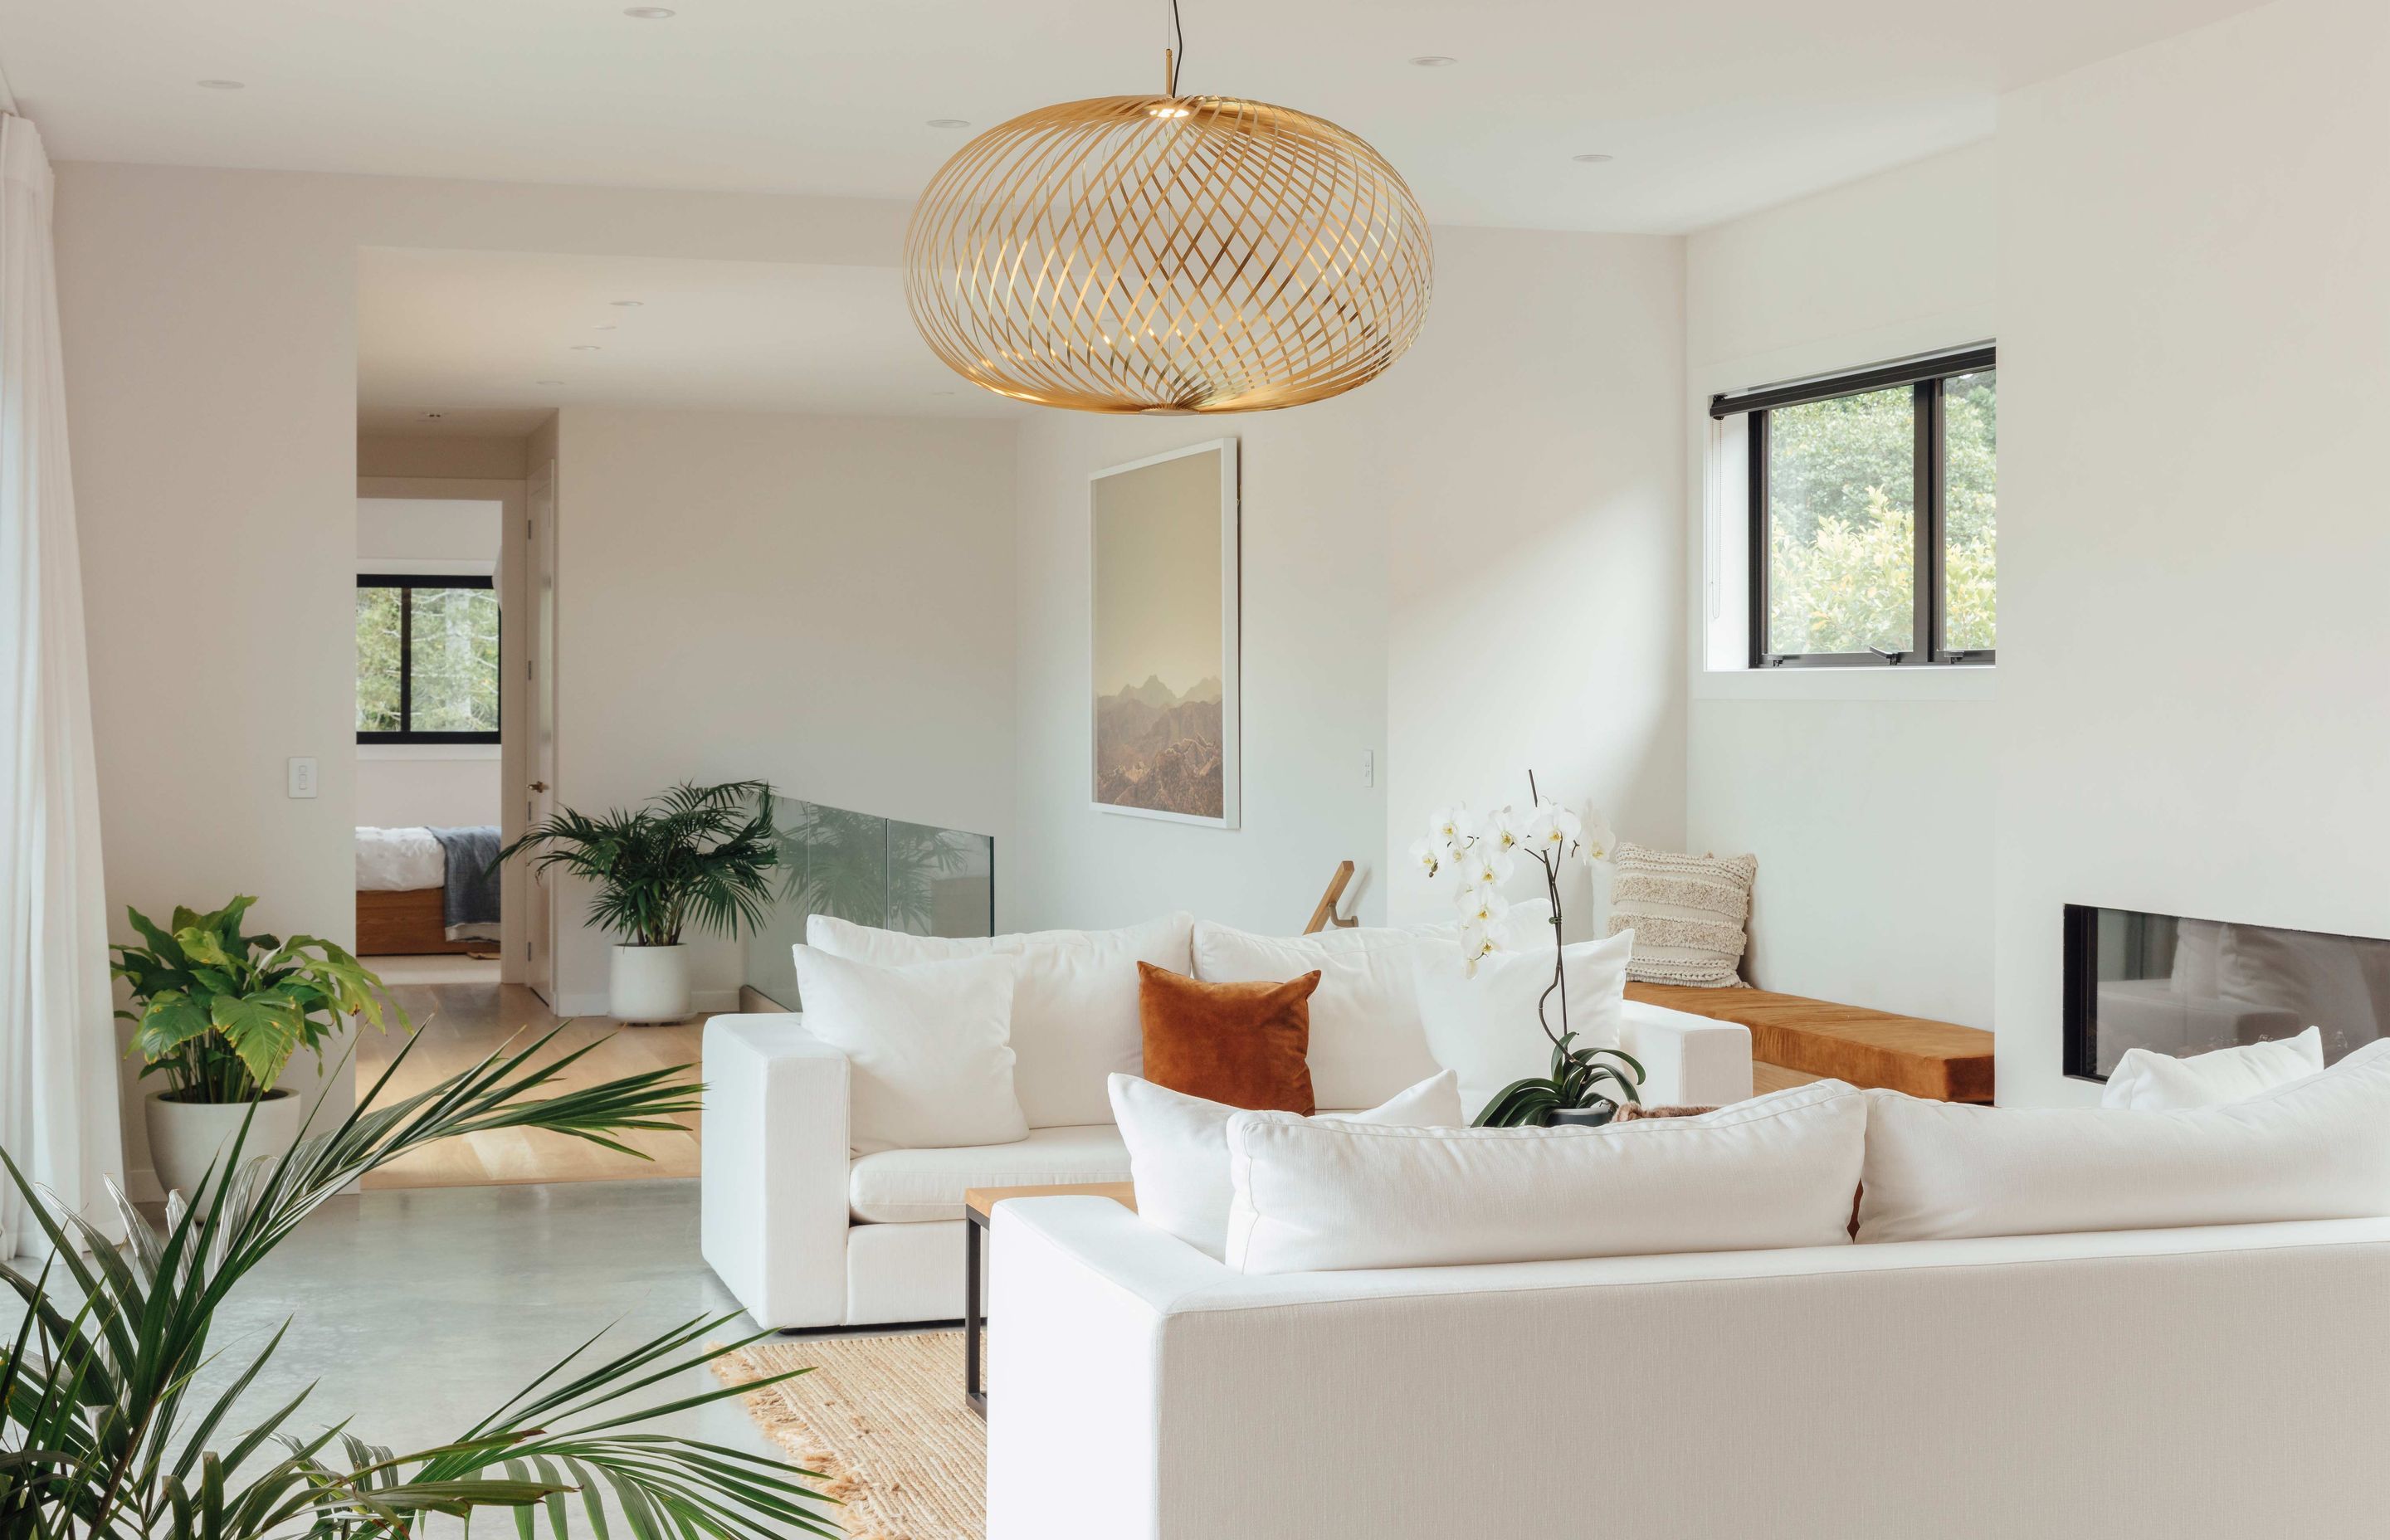 To create a number of dedicated spaces for family members to retreat to, three living areas have been incorporated throughout the home; one on each level.